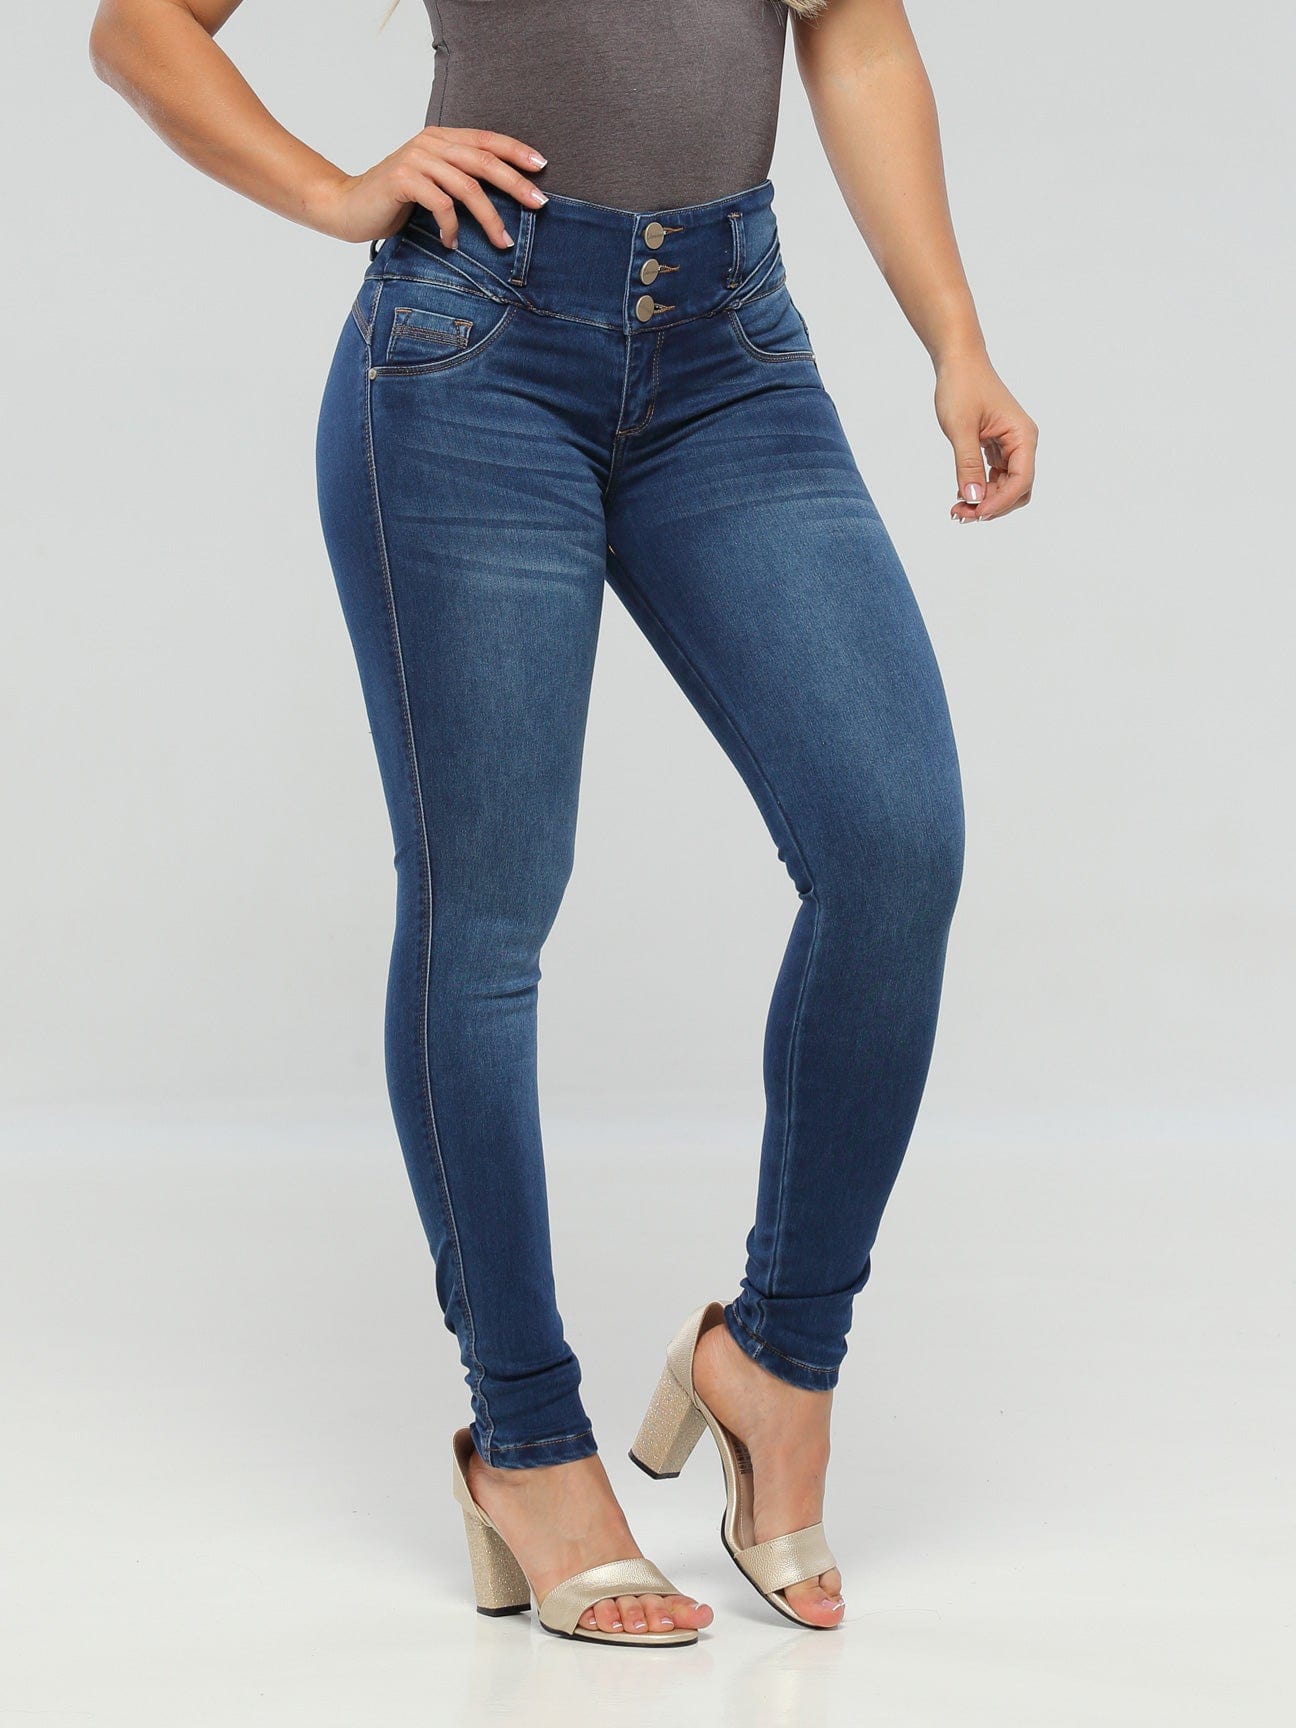 High Waist Tummy Control Skinny Jeans For Women Stretchy Colombian Denim, Curvy  Fit Ankle Length Pants From Omky, $21.3